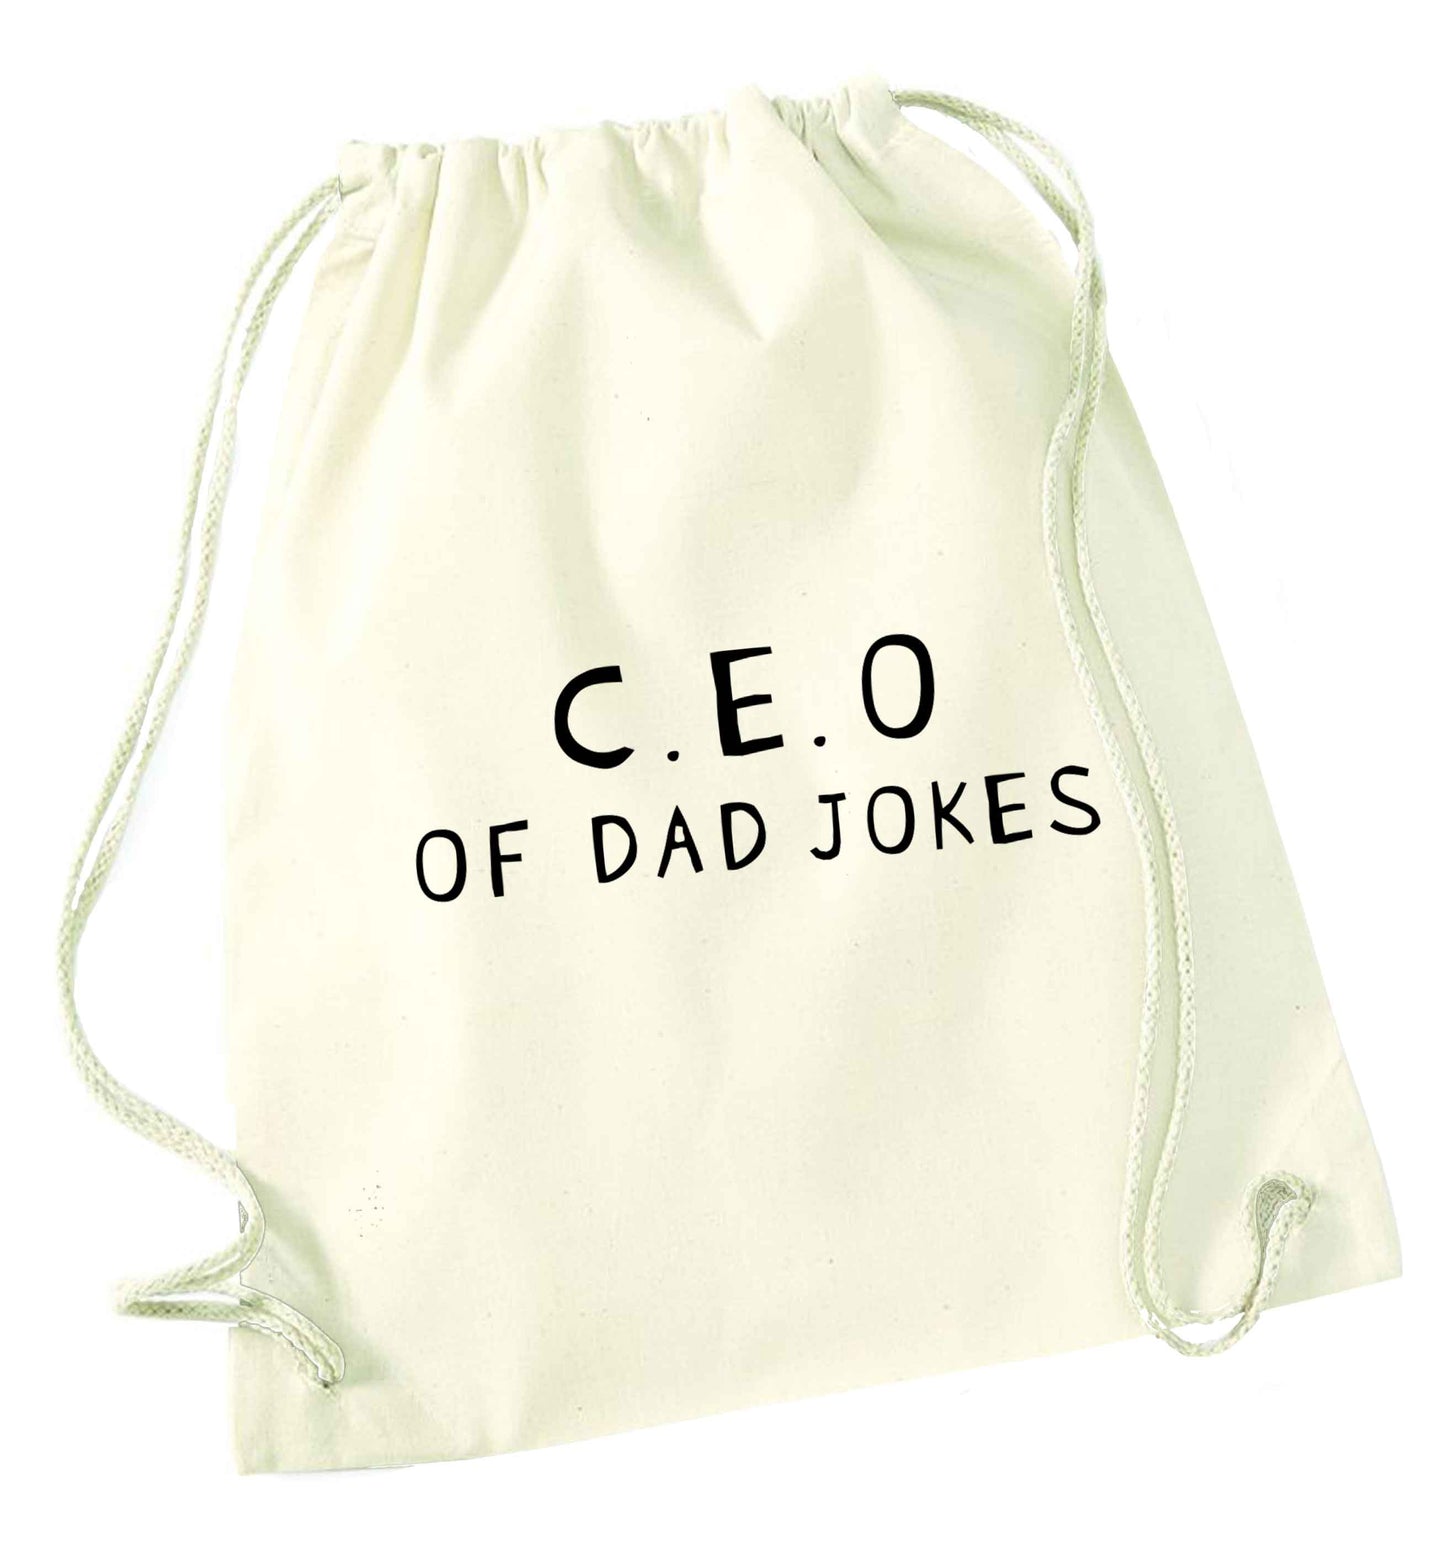 We love this for YOU! Who else loves saying this?!  natural drawstring bag